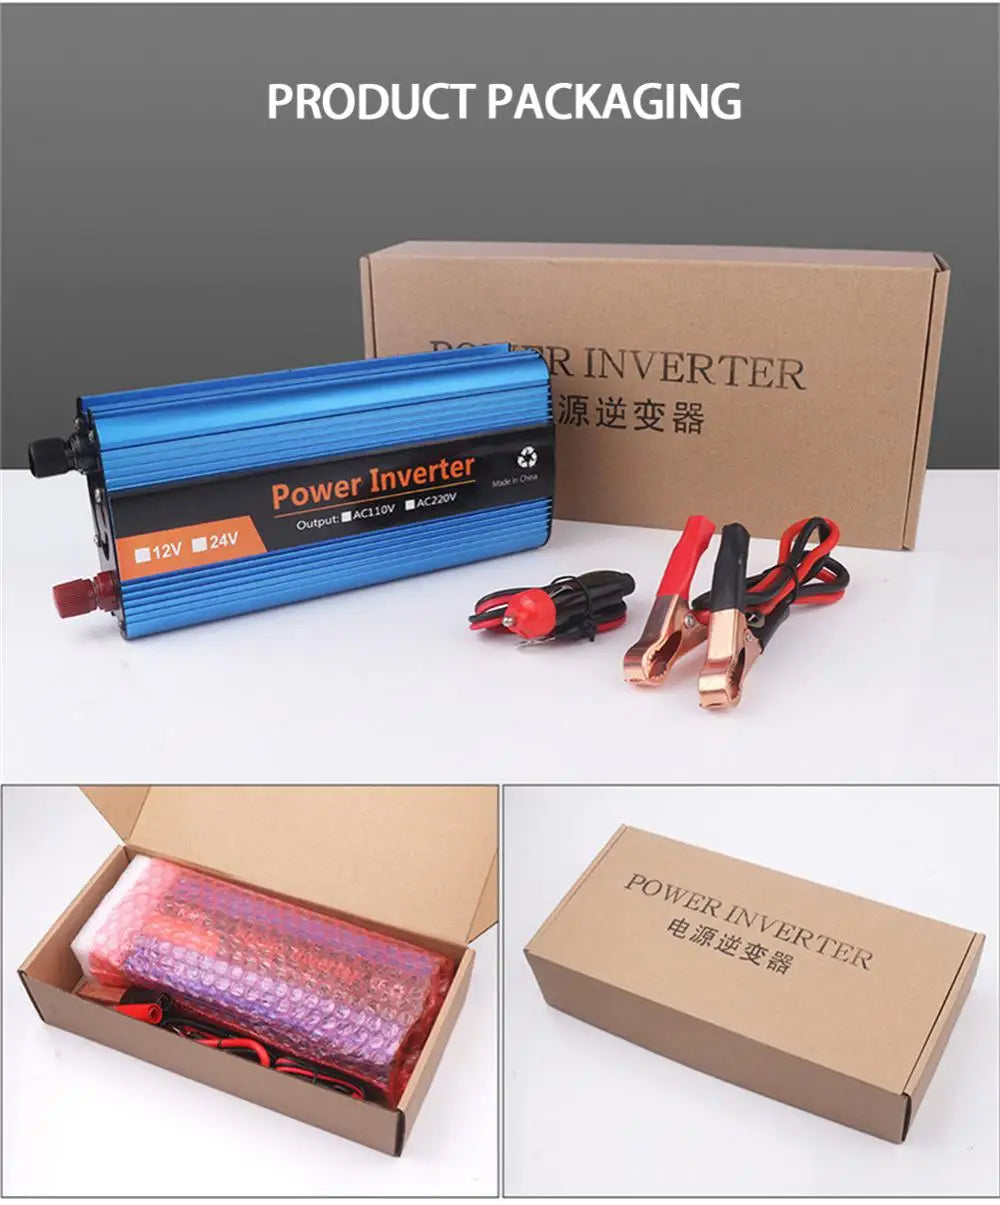 4000w/6000w Pure Sine Inverter, Inverter converts DC power to 220V AC for powering devices, featuring an LED screen.